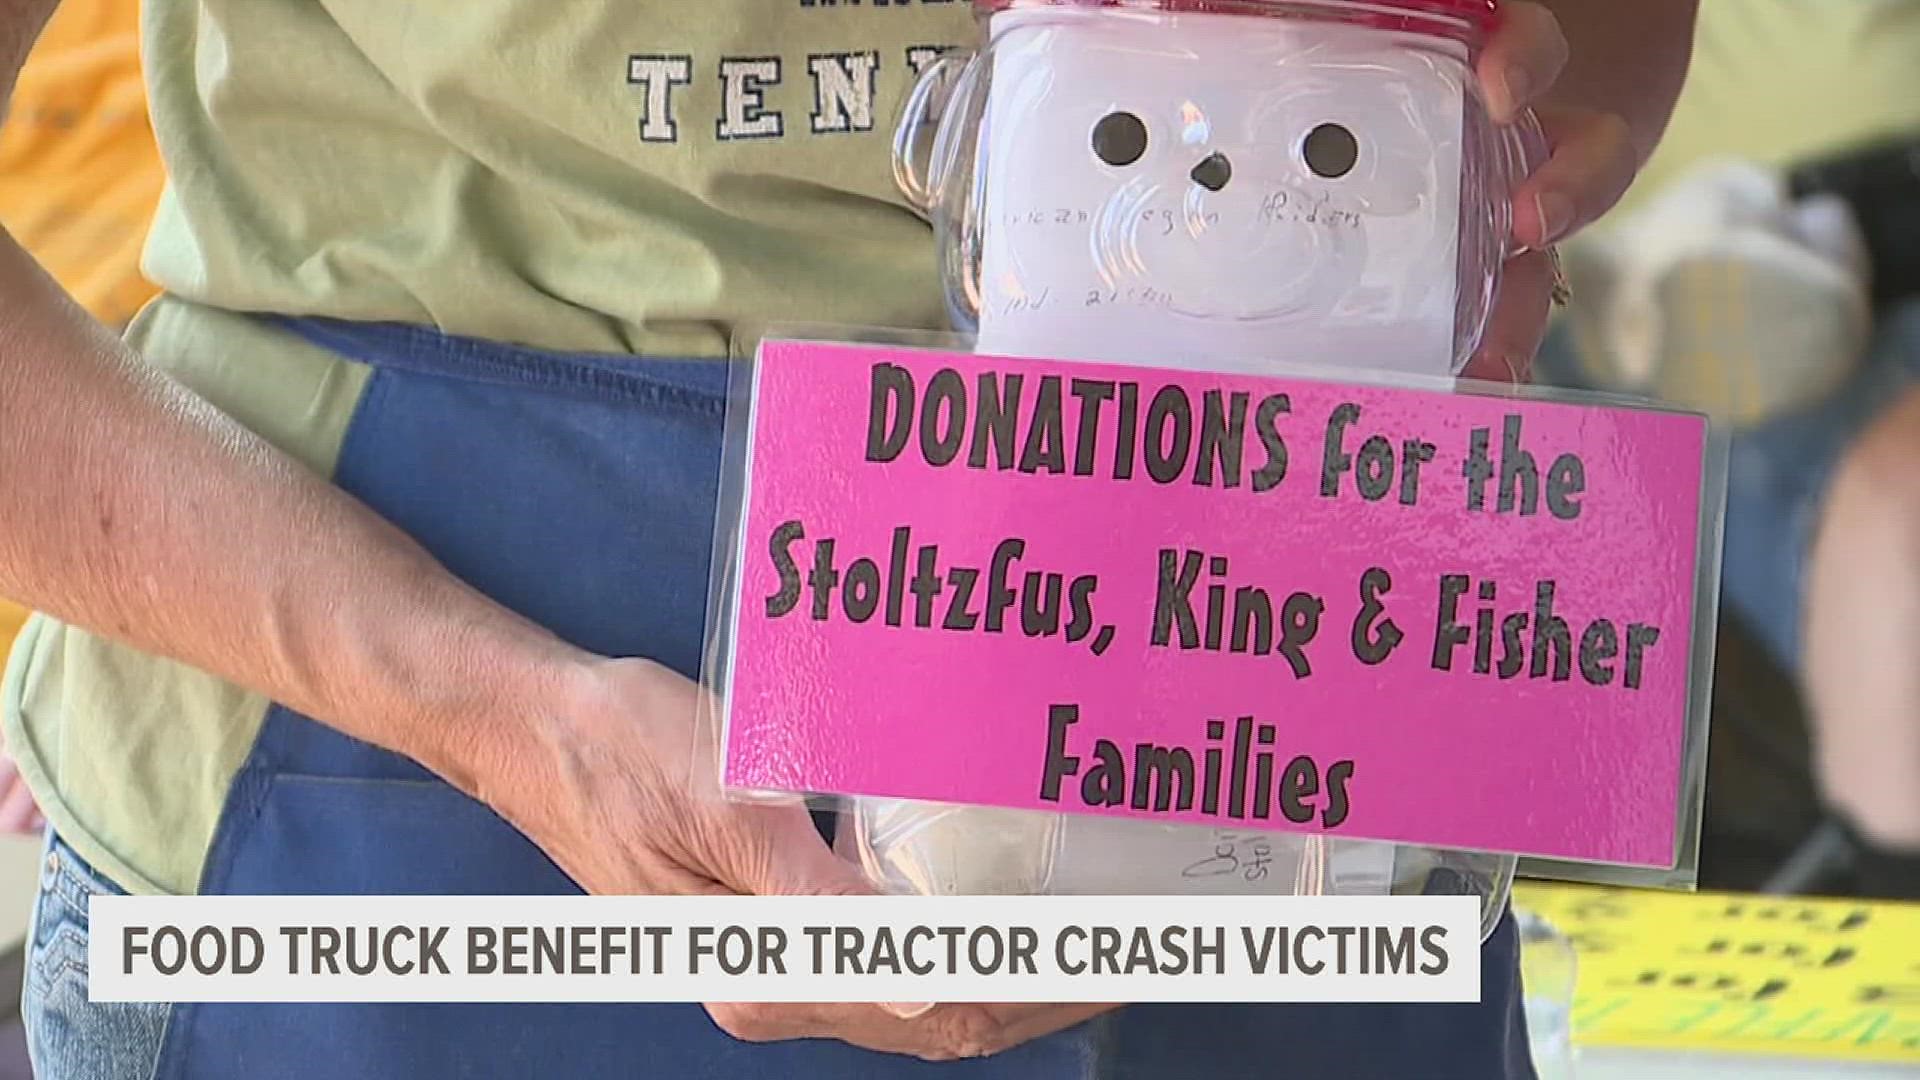 Hundreds gathered at the New Bridgeville Fire Company to raise money for the Stoltfuz, King, and Fisher families.